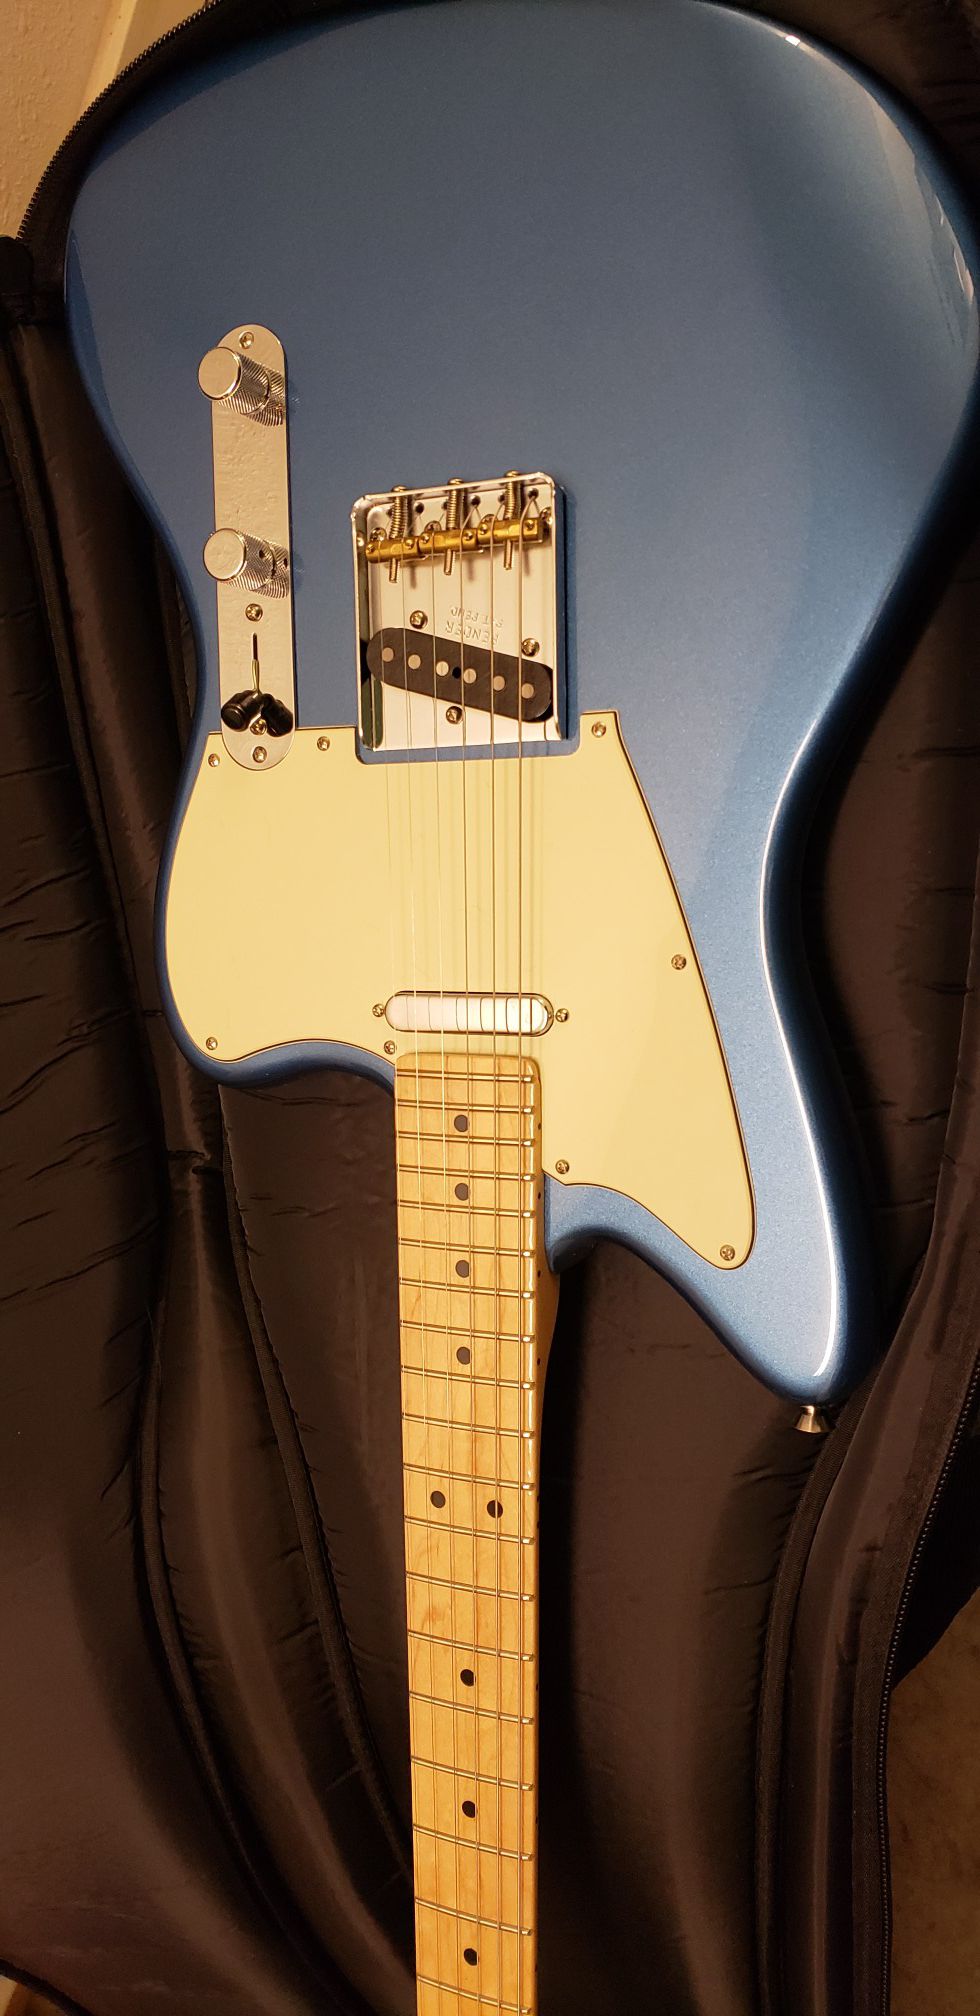 2018 Fender Offset Telecaster, "MINT", American Standard, Limited Edition